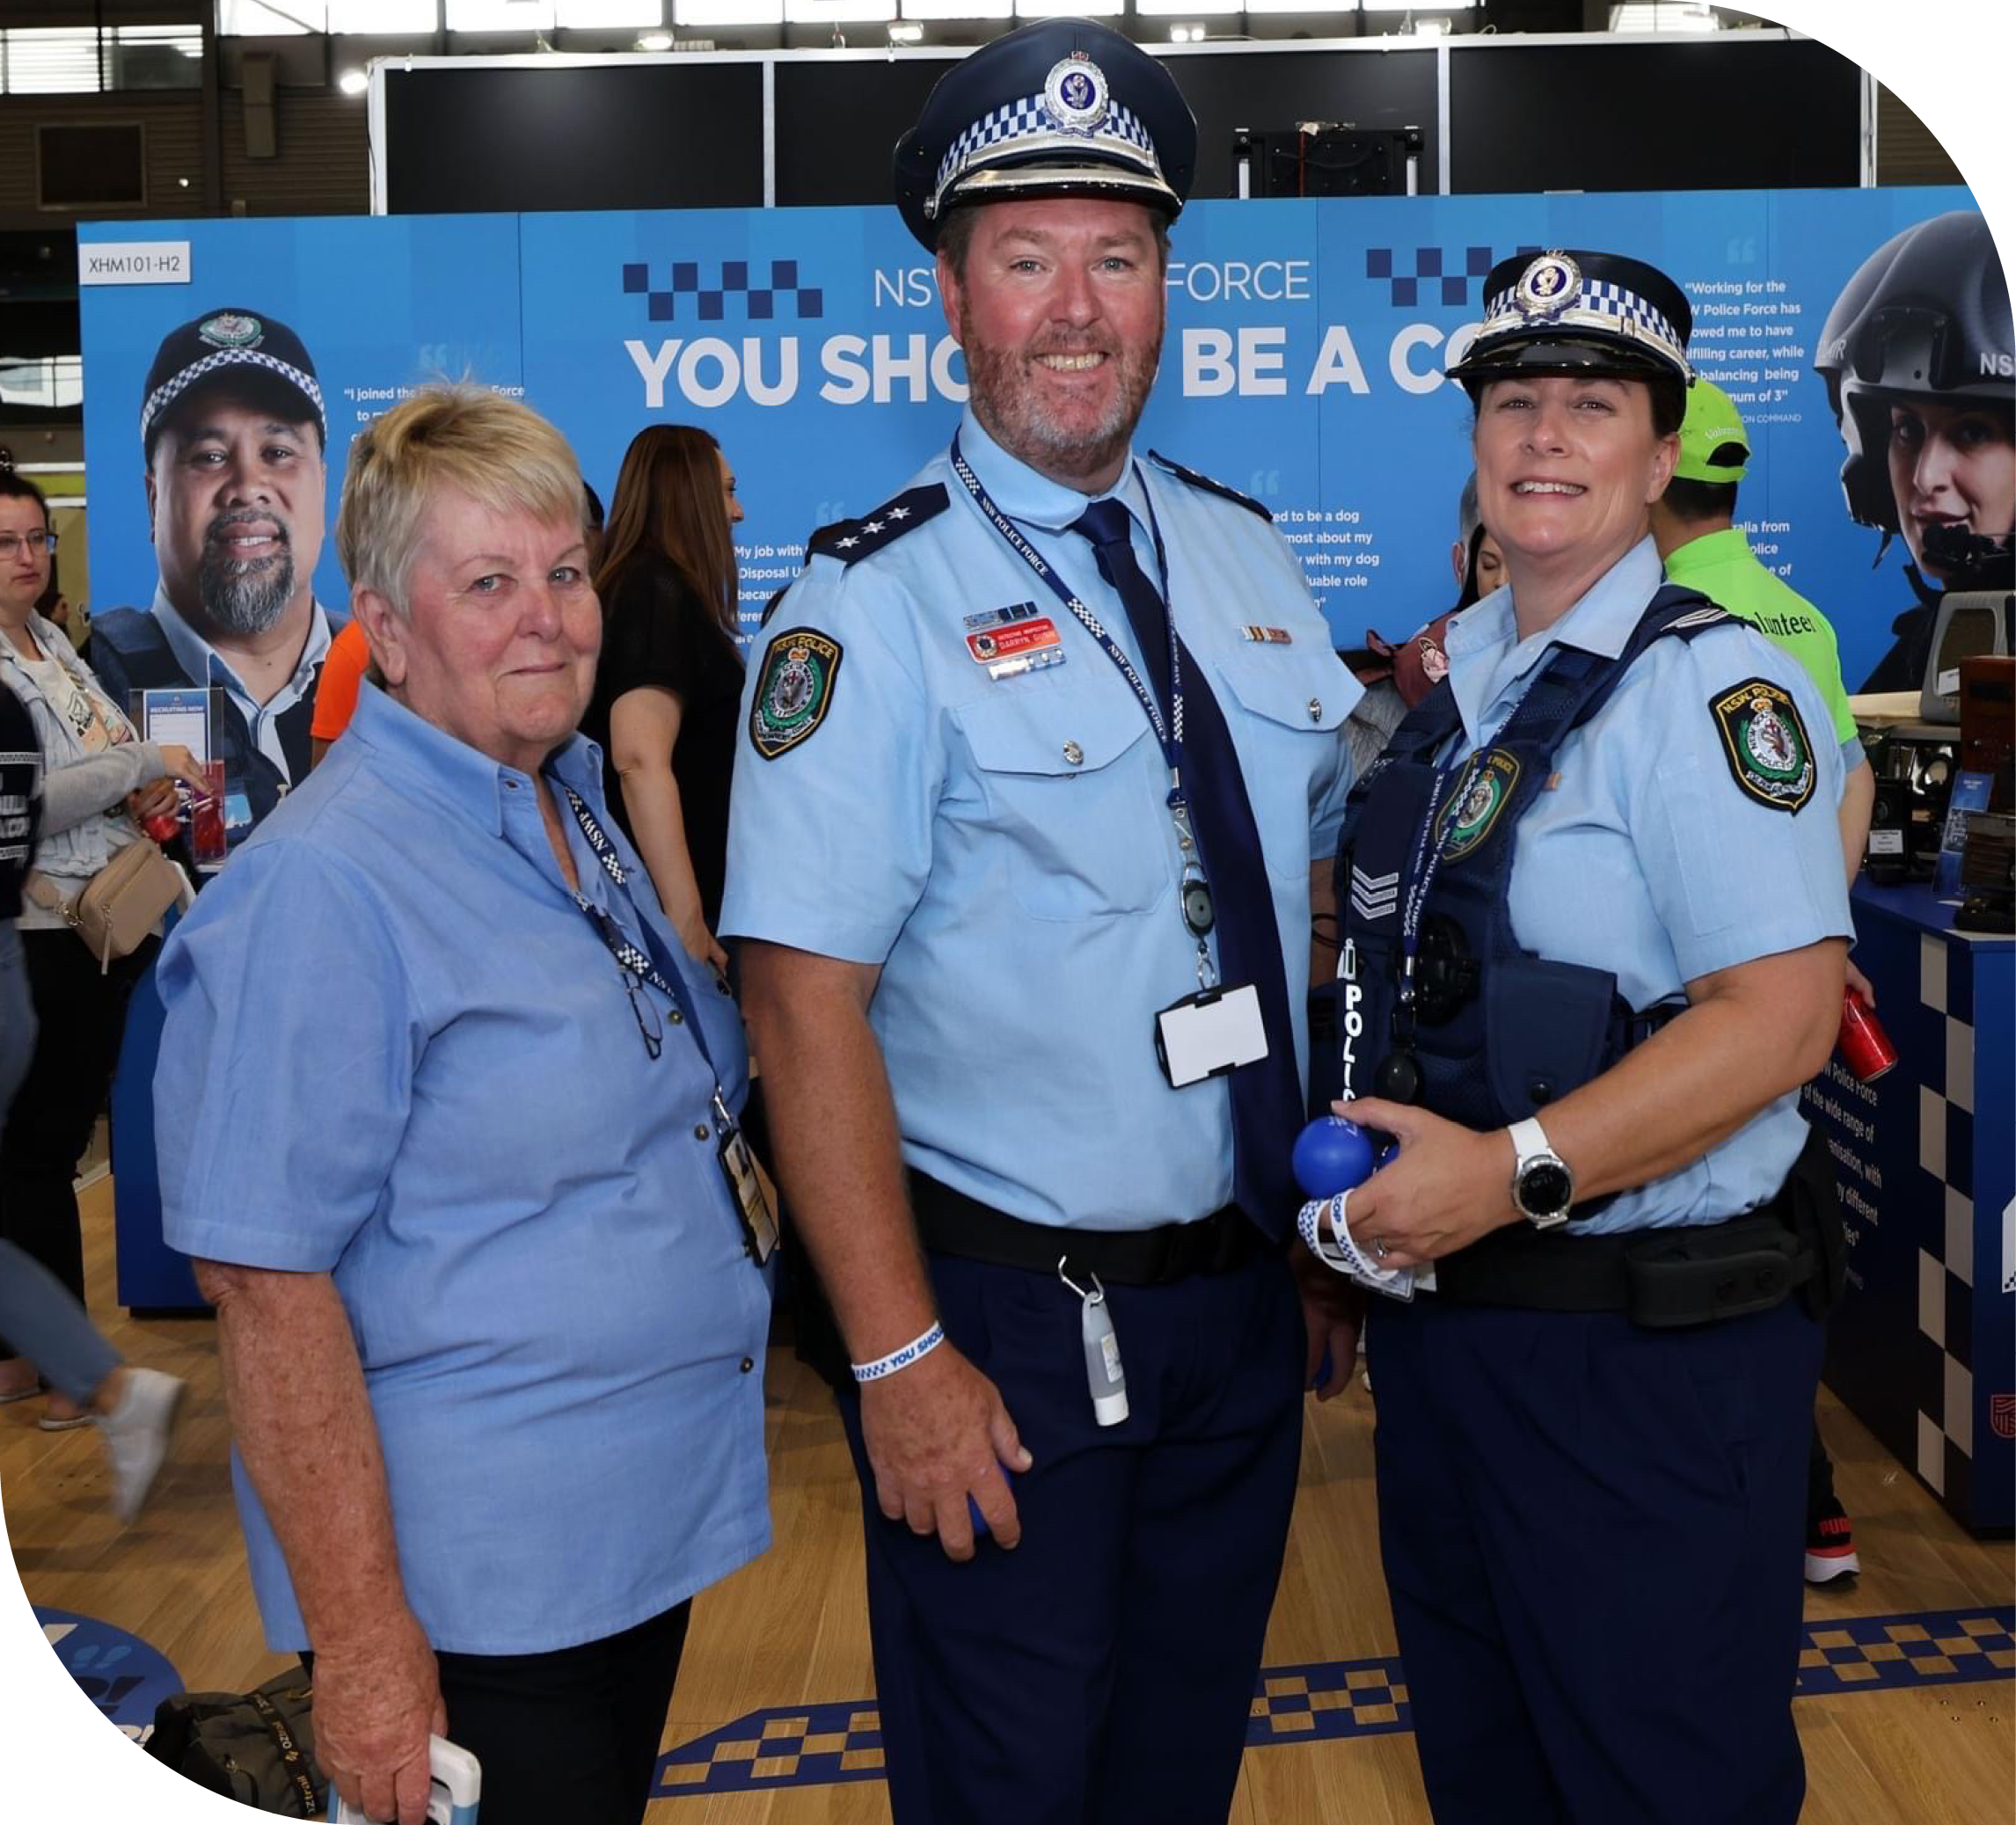 NSW Police showcases career options at Royal Easter Show